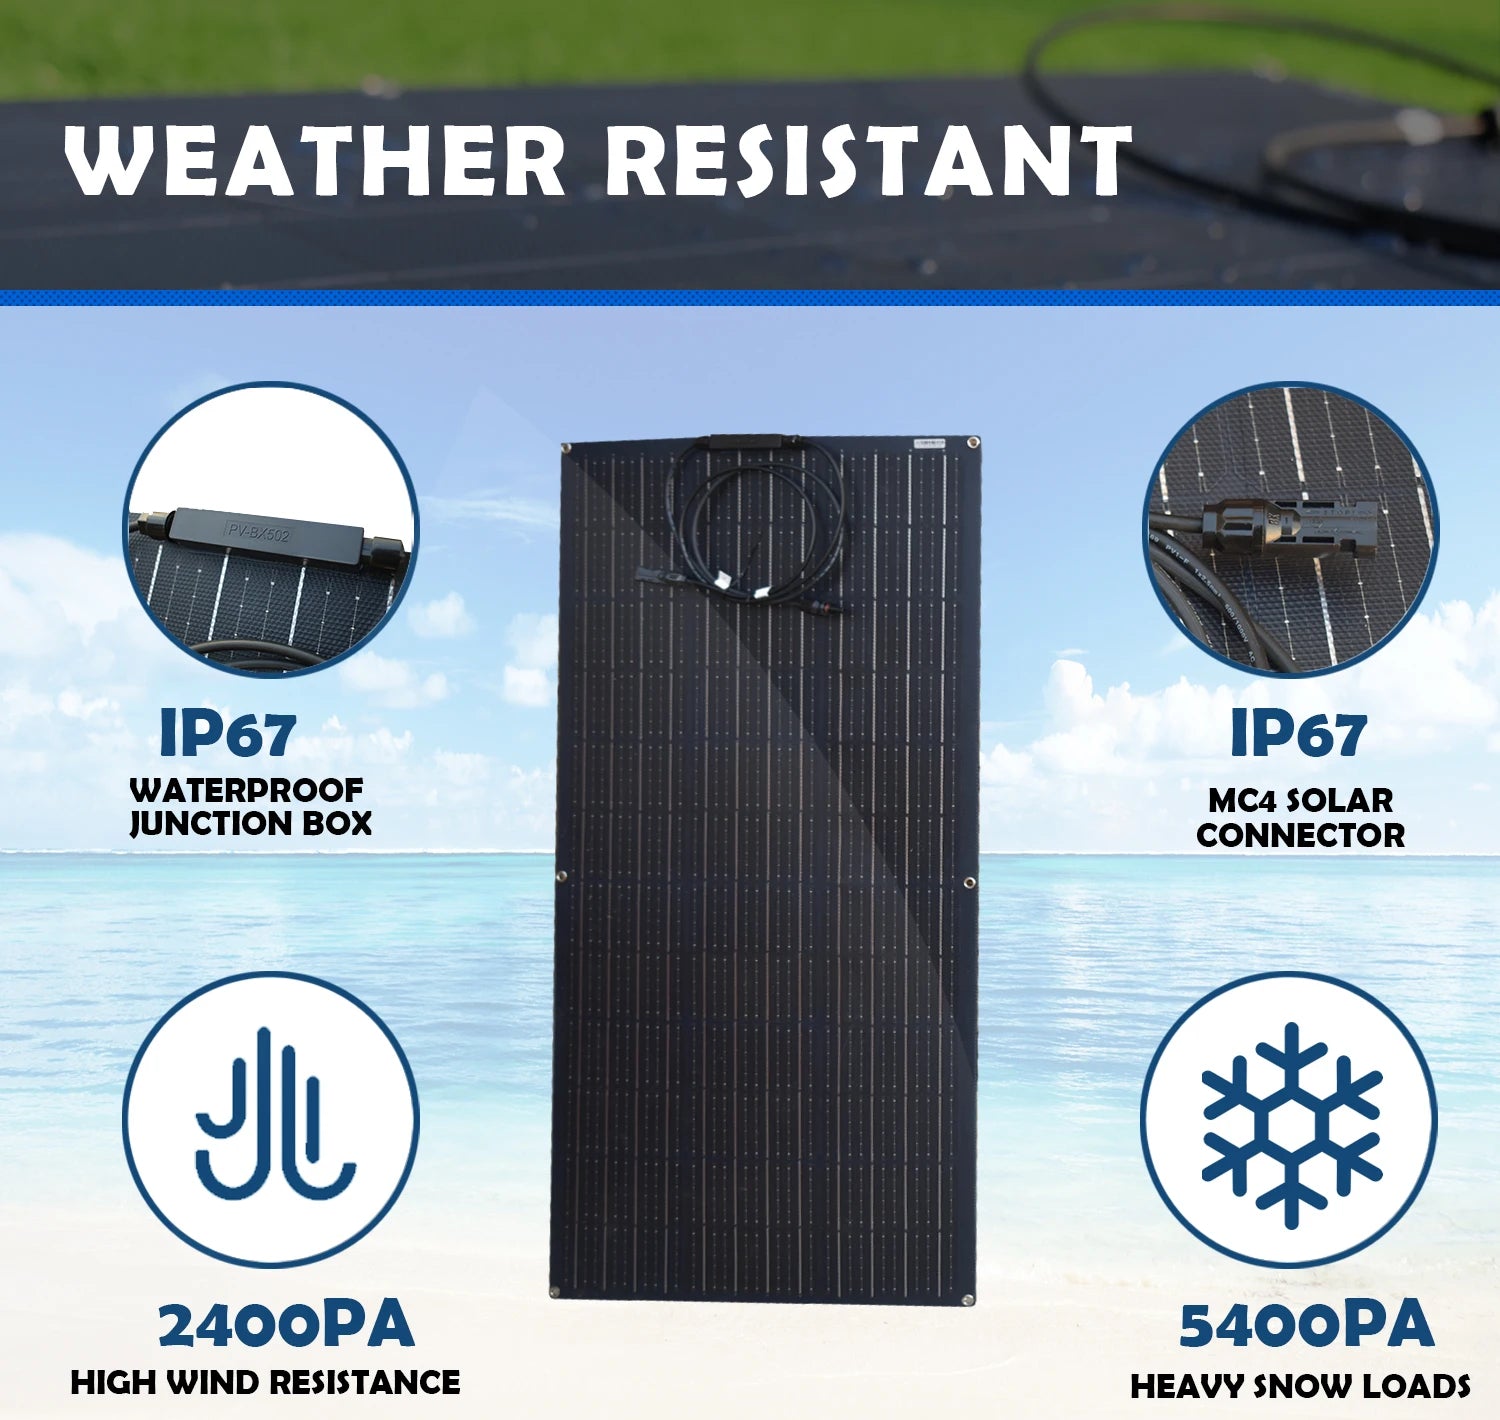 JINGYANG long lasting Semi Flexible solar panel, Reliable solar power solution for outdoor use, resistant to water, wind, and snow.